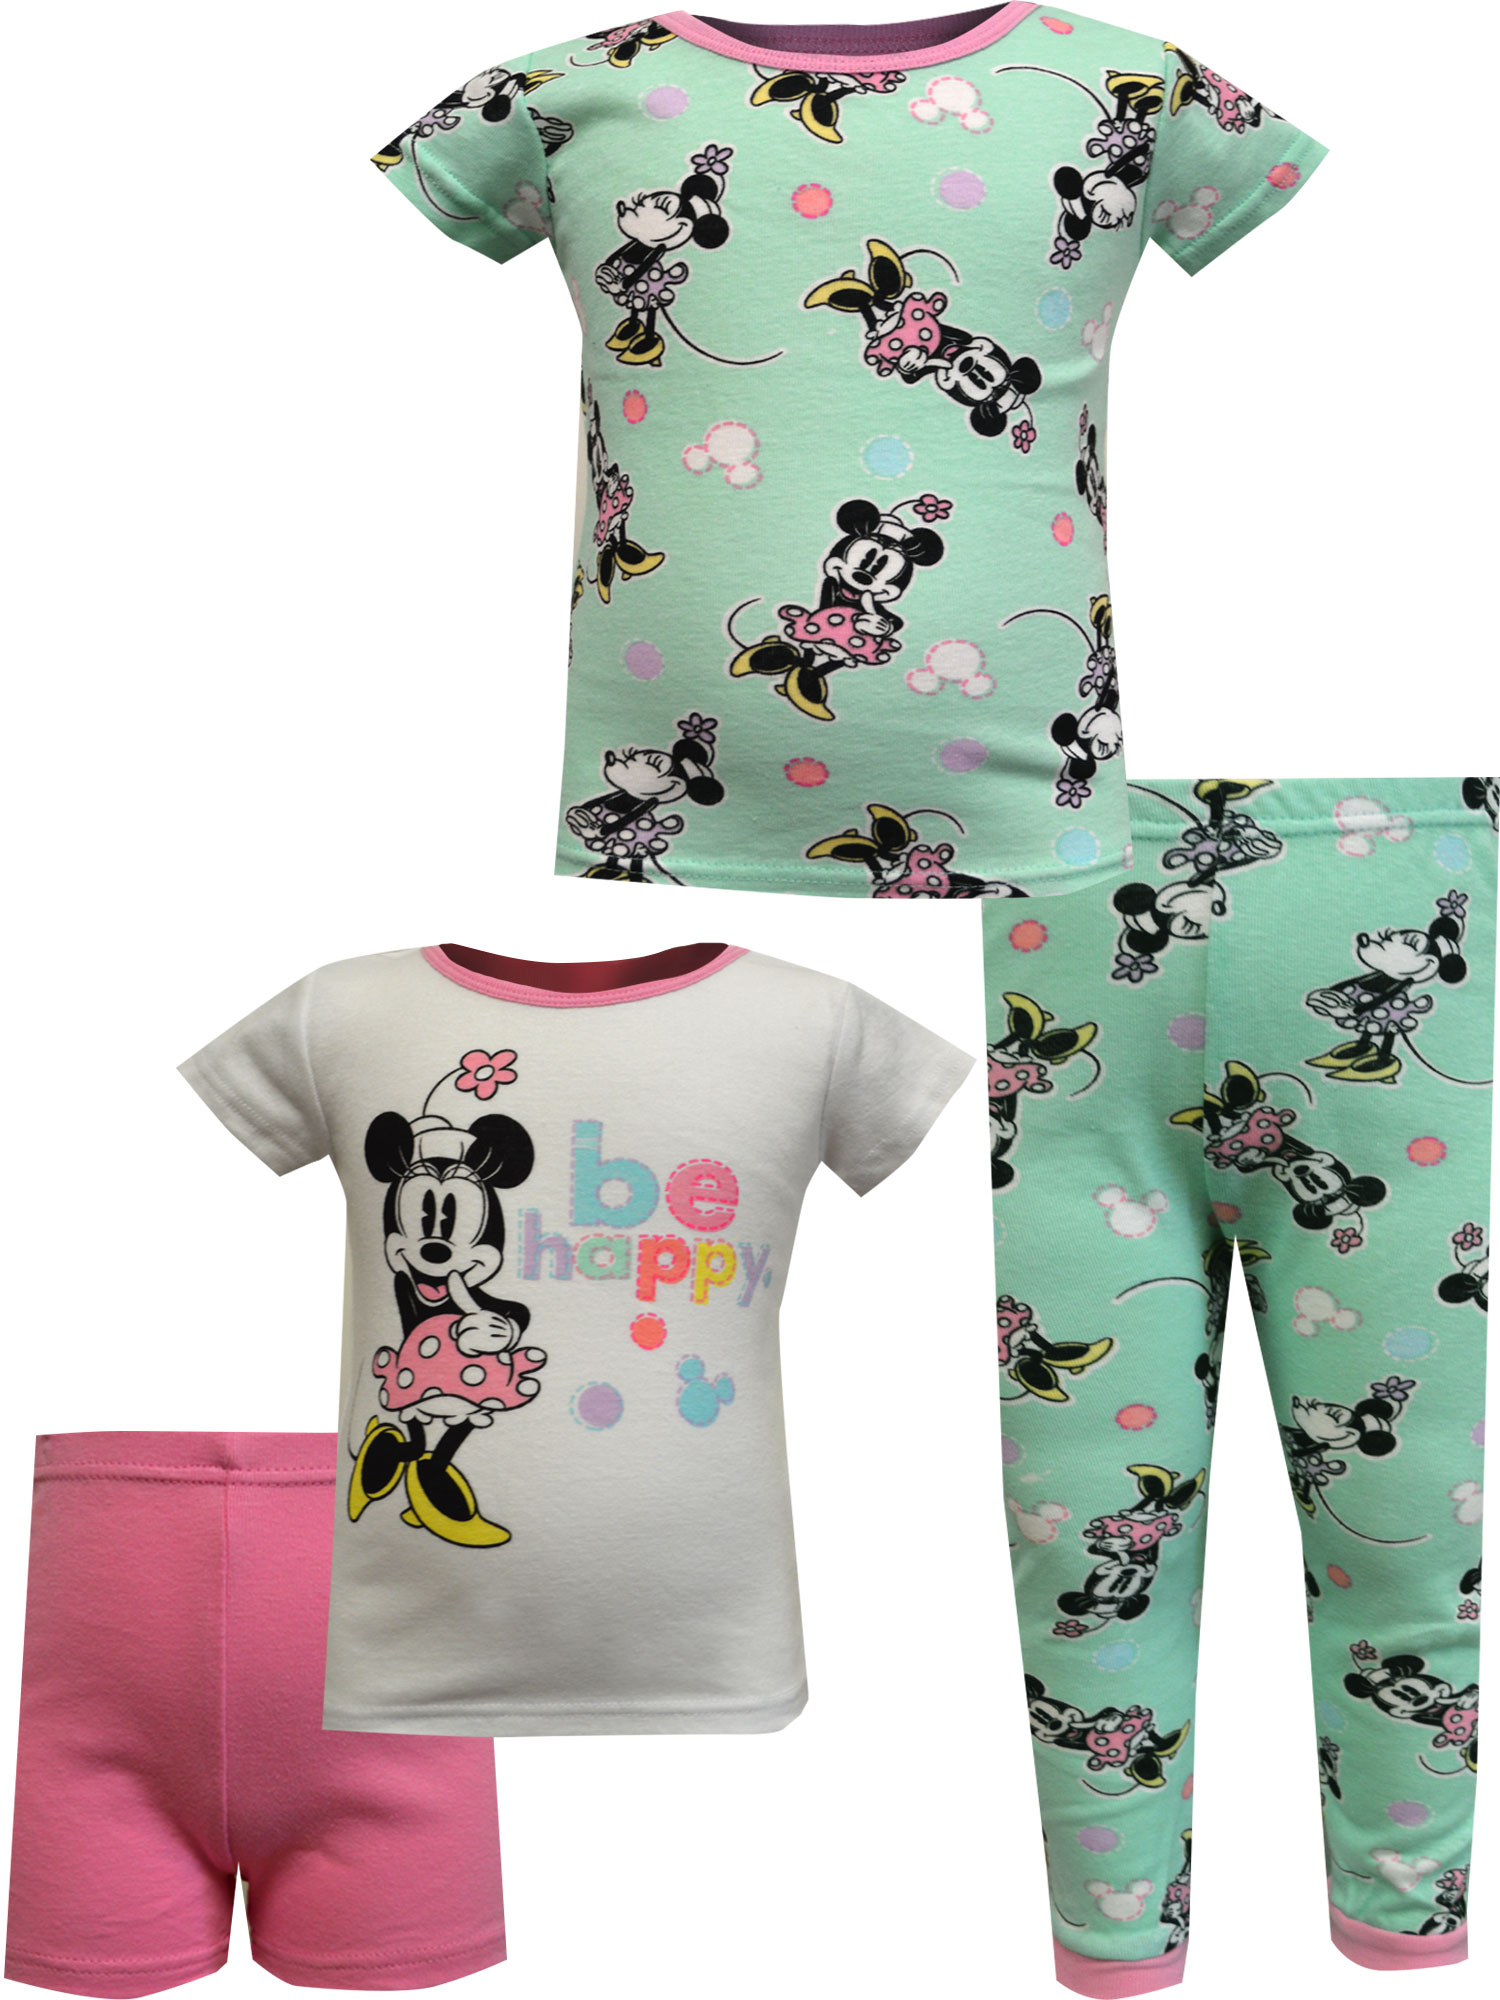 Favorite Characters Girls Disney Jr Minnie Mouse Be Happy 4 Pc Cotton Toddler Pajamas (3T) - image 1 of 1